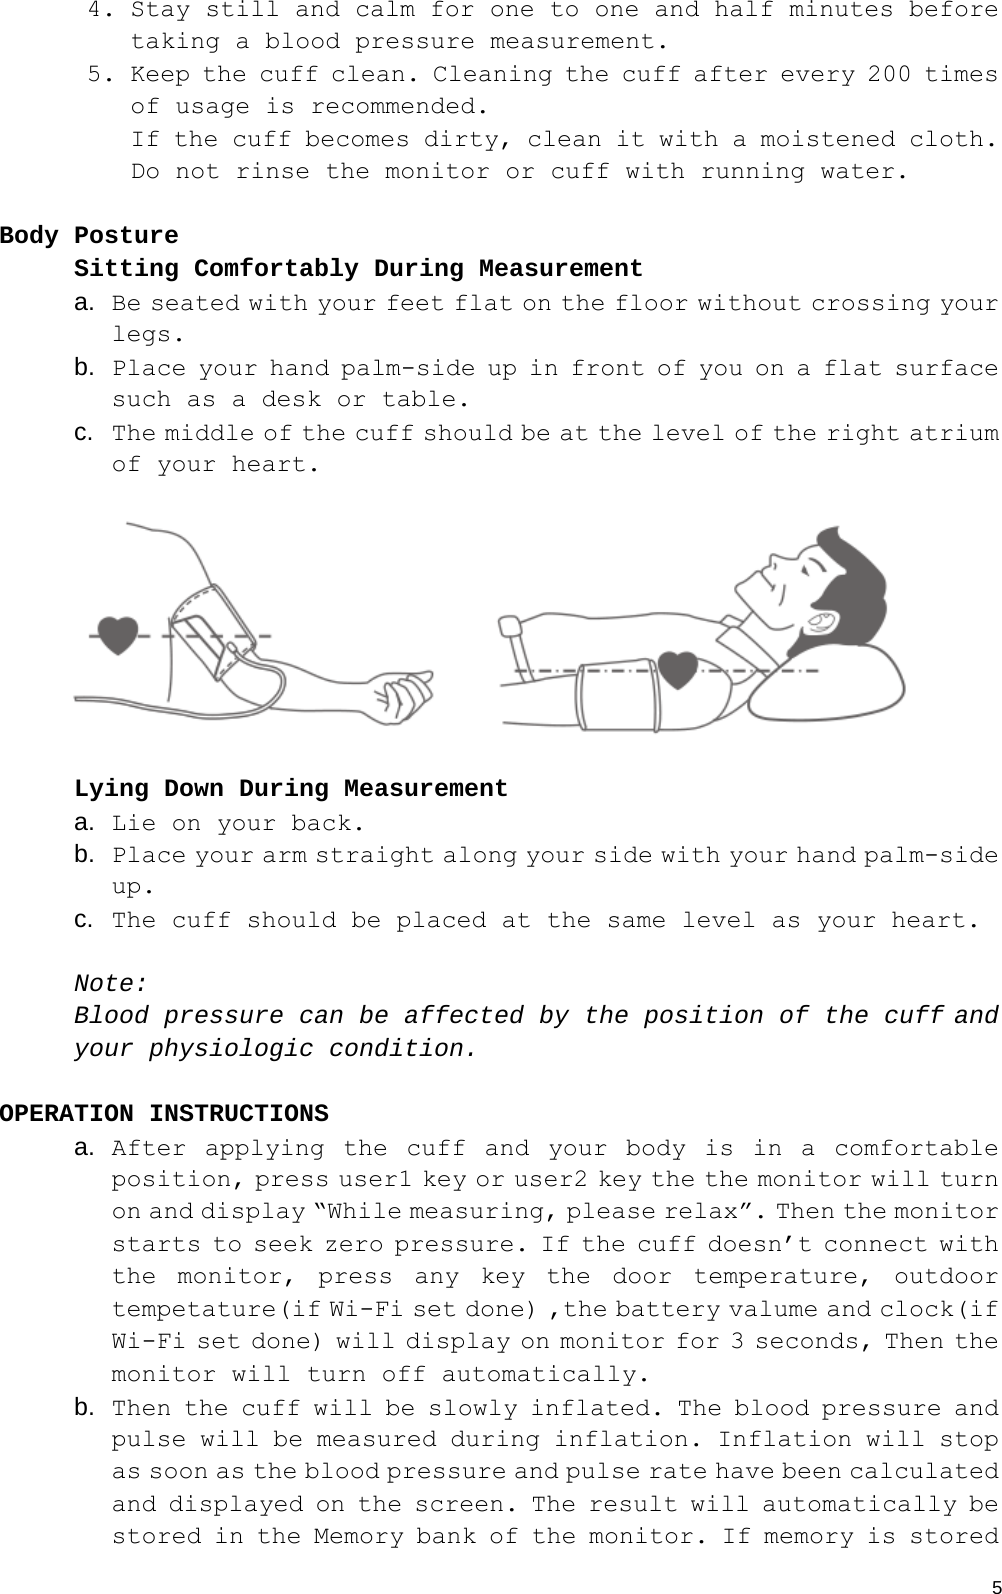  54. Stay still and calm for one to one and half minutes before taking a blood pressure measurement. 5. Keep the cuff clean. Cleaning the cuff after every 200 times of usage is recommended. If the cuff becomes dirty, clean it with a moistened cloth. Do not rinse the monitor or cuff with running water.   Body Posture Sitting Comfortably During Measurement a.  Be seated with your feet flat on the floor without crossing your legs. b.  Place your hand palm-side up in front of you on a flat surface such as a desk or table. c.  The middle of the cuff should be at the level of the right atrium of your heart.  Lying Down During Measurement a.  Lie on your back. b.  Place your arm straight along your side with your hand palm-side up. c.  The cuff should be placed at the same level as your heart.  Note: Blood pressure can be affected by the position of the cuff and your physiologic condition.  OPERATION INSTRUCTIONS  a.  After applying the cuff and your body is in a comfortable position, press user1 key or user2 key the the monitor will turn on and display “While measuring, please relax”. Then the monitor starts to seek zero pressure. If the cuff doesn’t connect with the monitor, press any key the door temperature, outdoor tempetature(if Wi-Fi set done) ,the battery valume and clock(if Wi-Fi set done) will display on monitor for 3 seconds, Then the monitor will turn off automatically. b.  Then the cuff will be slowly inflated. The blood pressure and pulse will be measured during inflation. Inflation will stop as soon as the blood pressure and pulse rate have been calculated and displayed on the screen. The result will automatically be stored in the Memory bank of the monitor. If memory is stored 